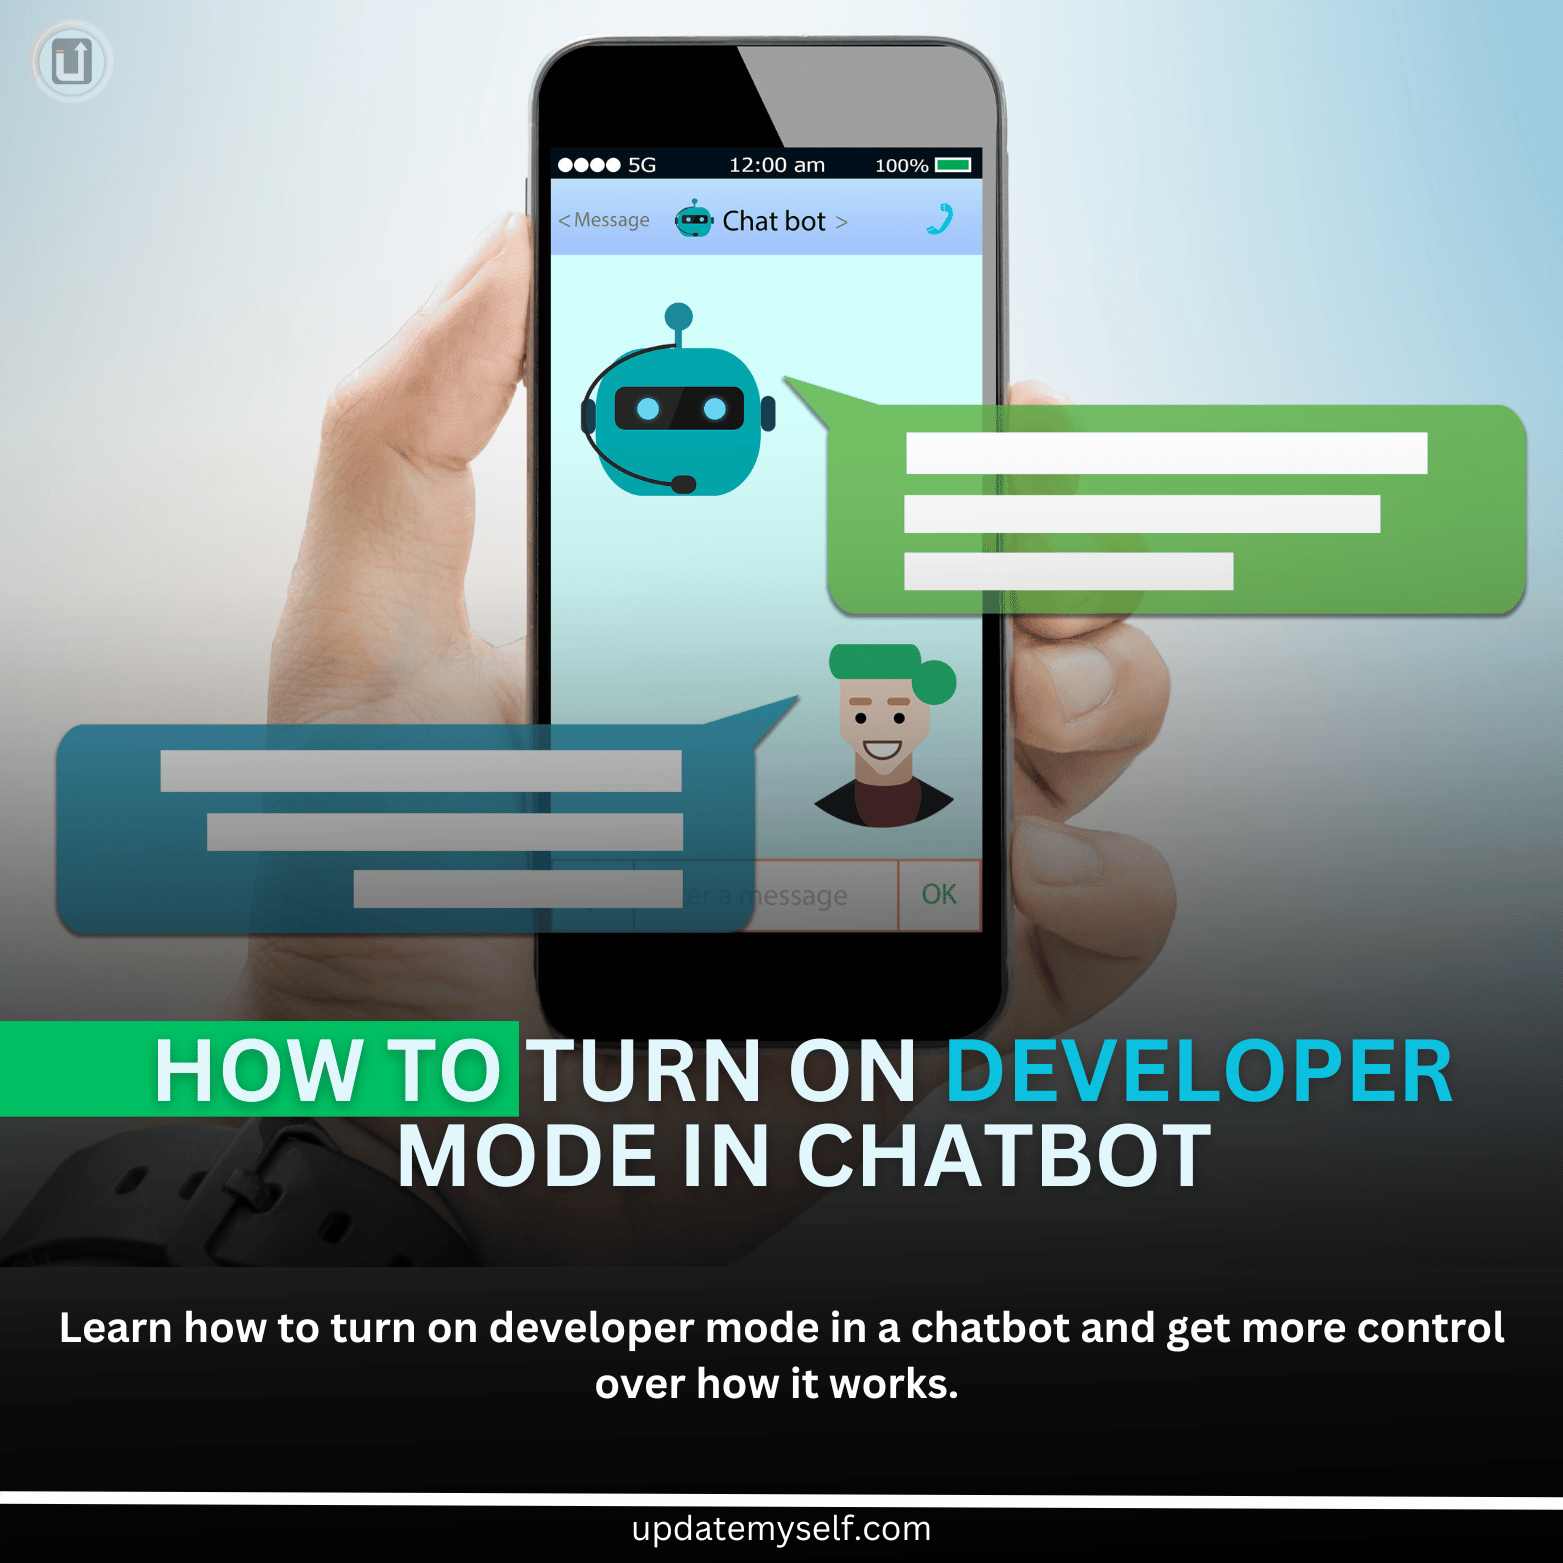 How to turn on developer mode in Chatbot